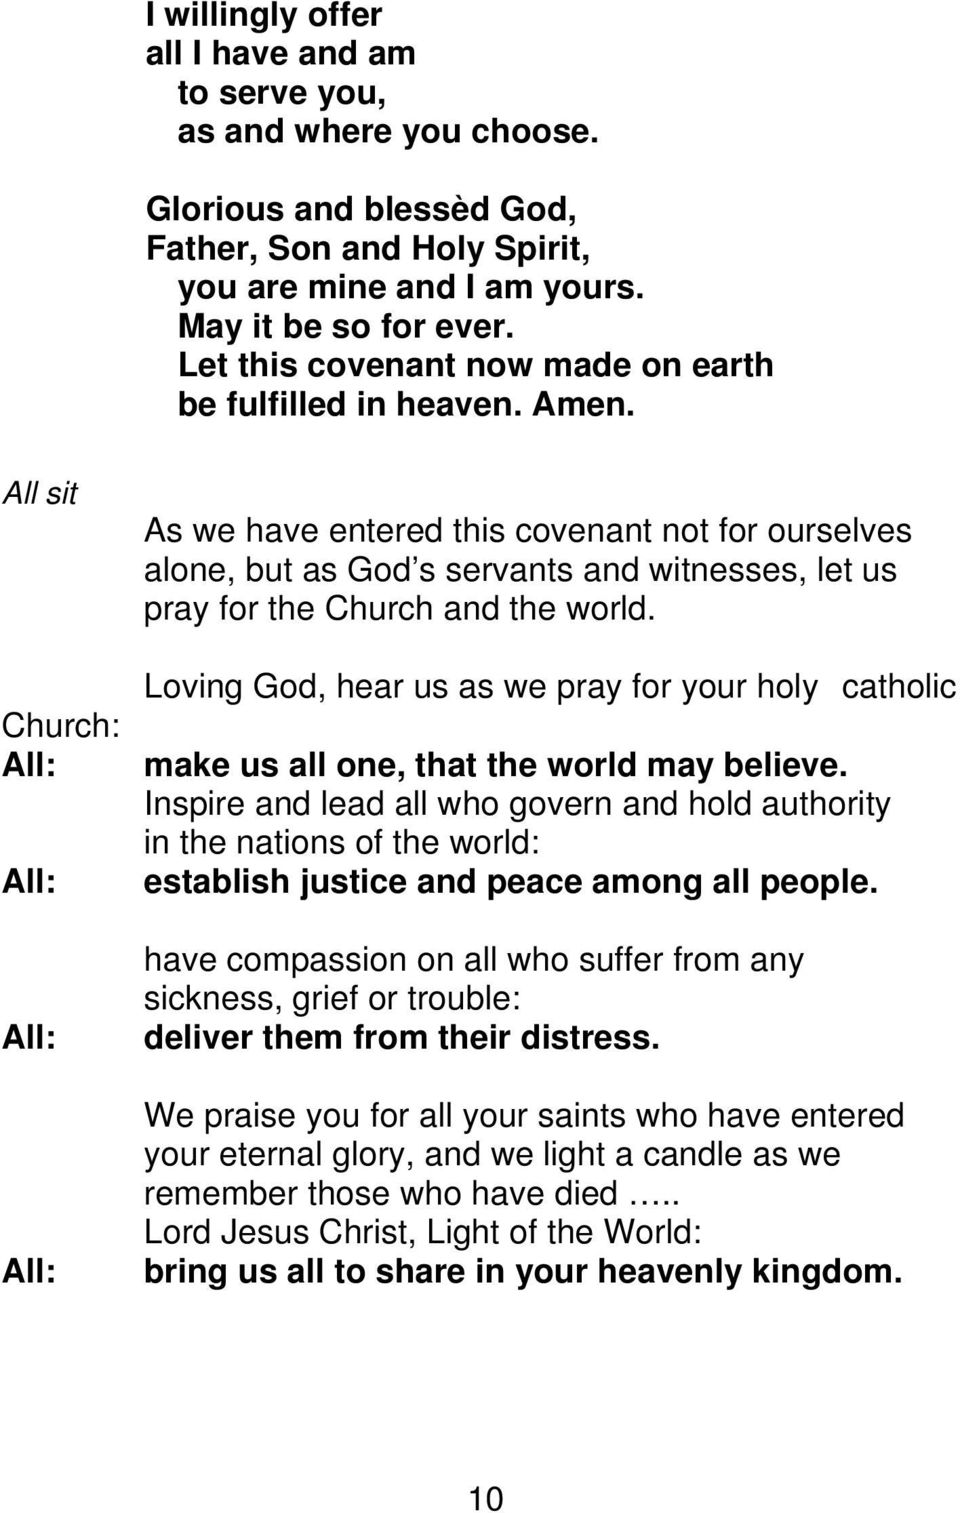 All sit Church: As we have entered this covenant not for ourselves alone, but as God s servants and witnesses, let us pray for the Church and the world.